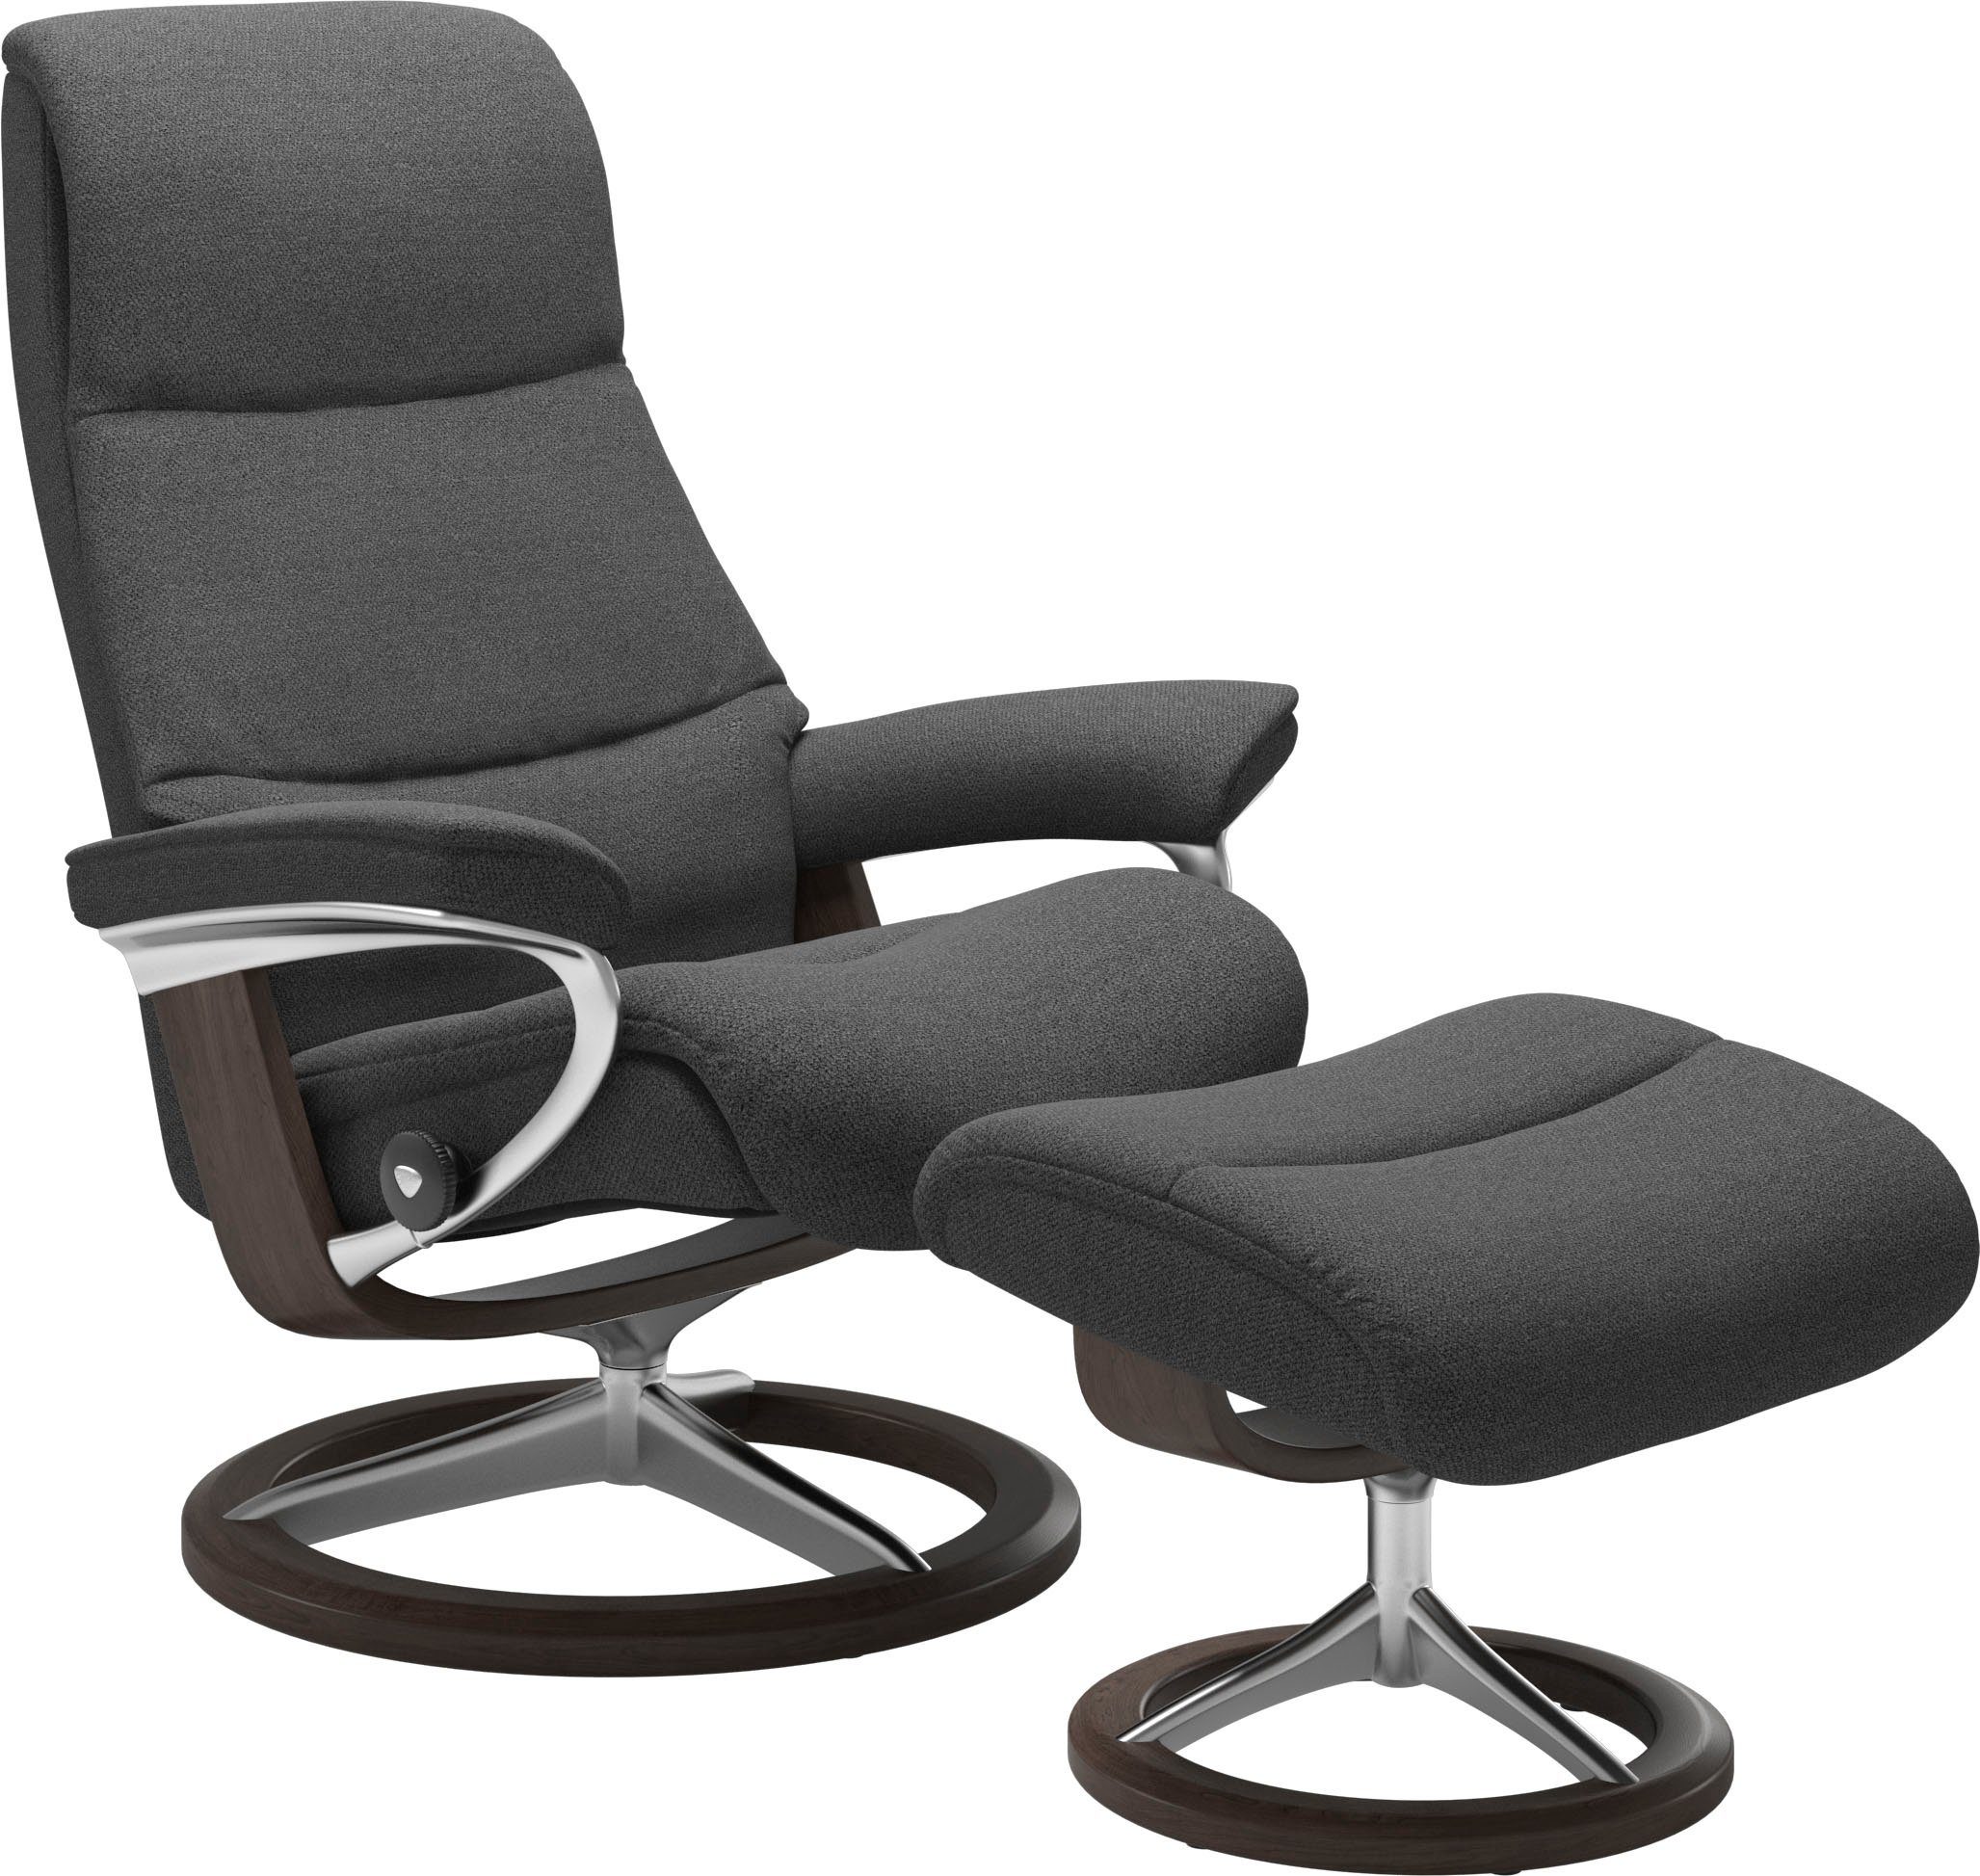 Größe View, mit Relaxsessel Signature Wenge Base, S,Gestell Stressless®